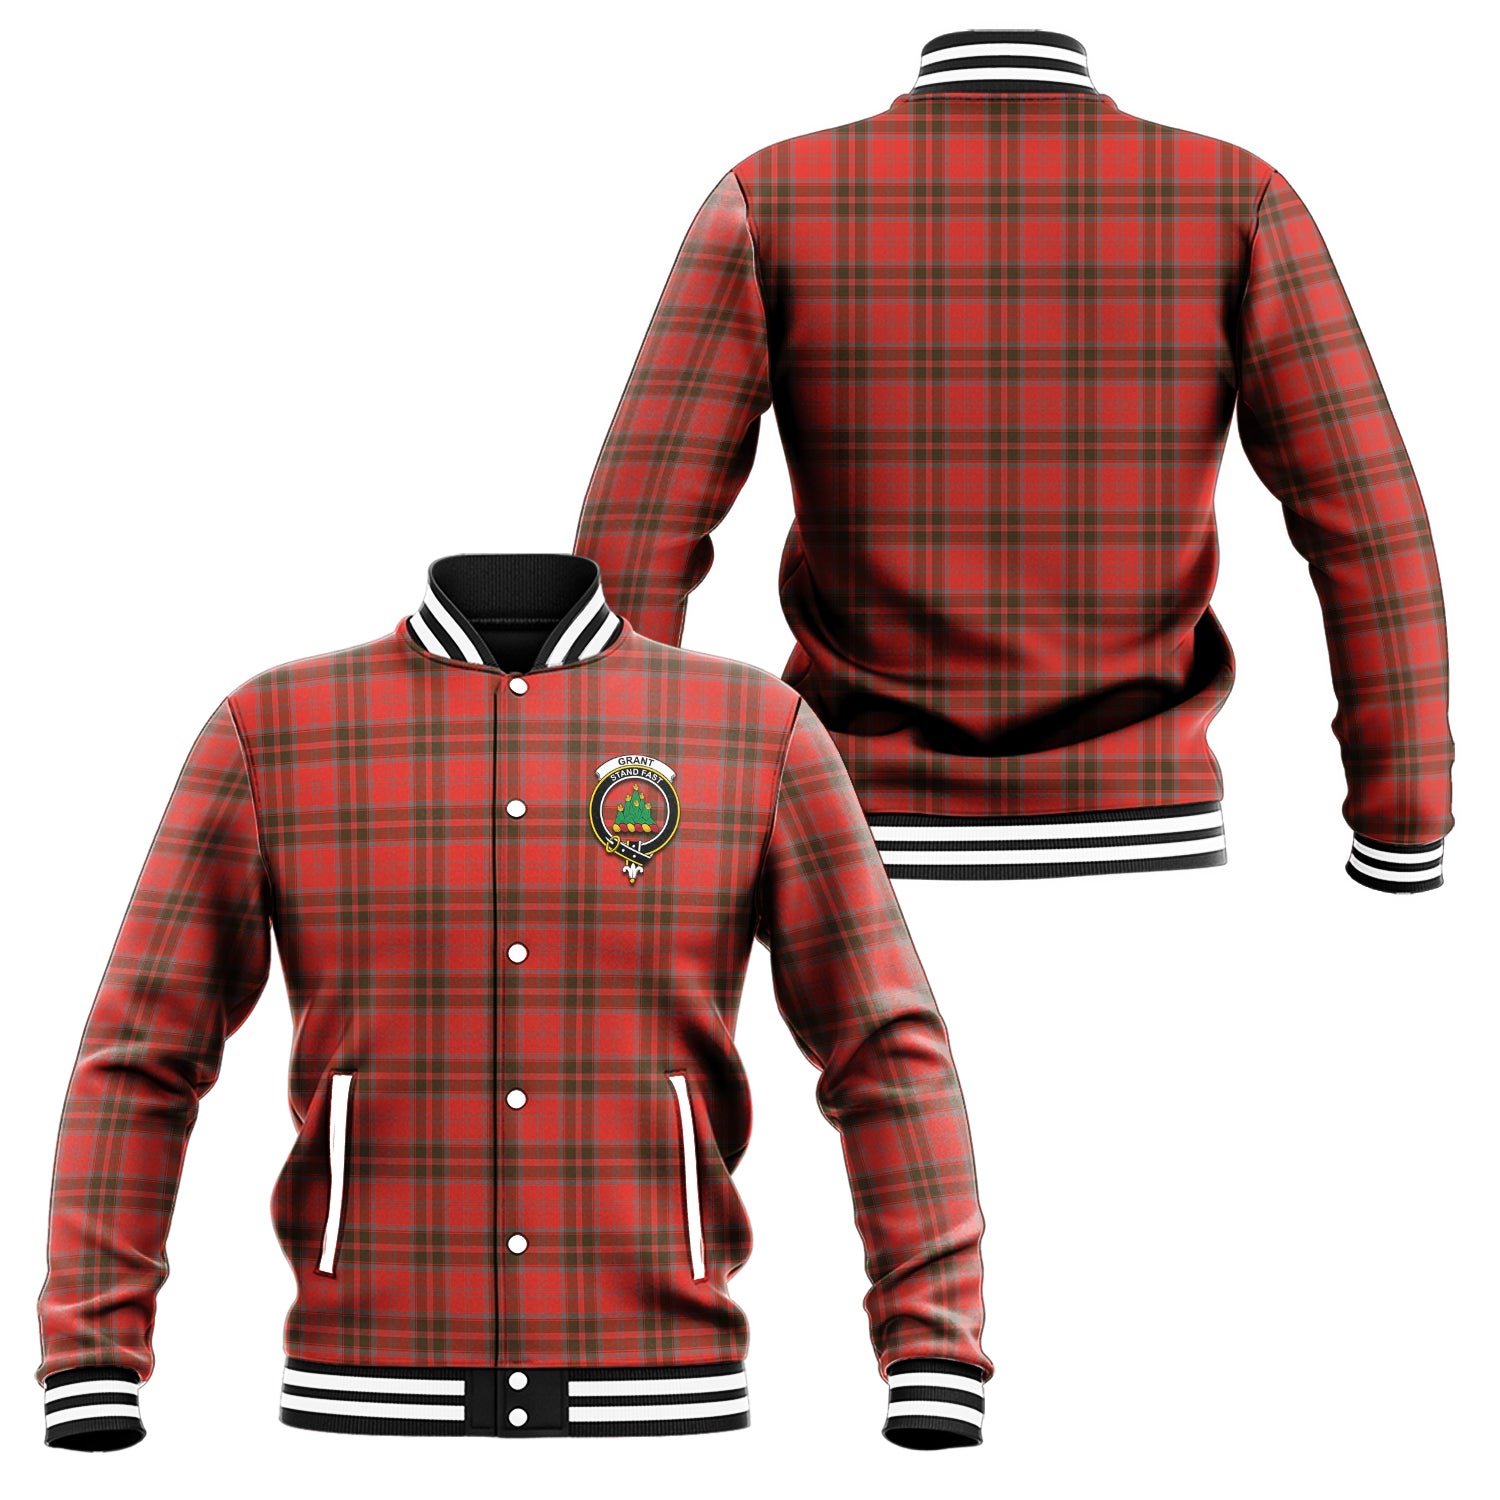 grant-weathered-tartan-baseball-jacket-with-family-crest